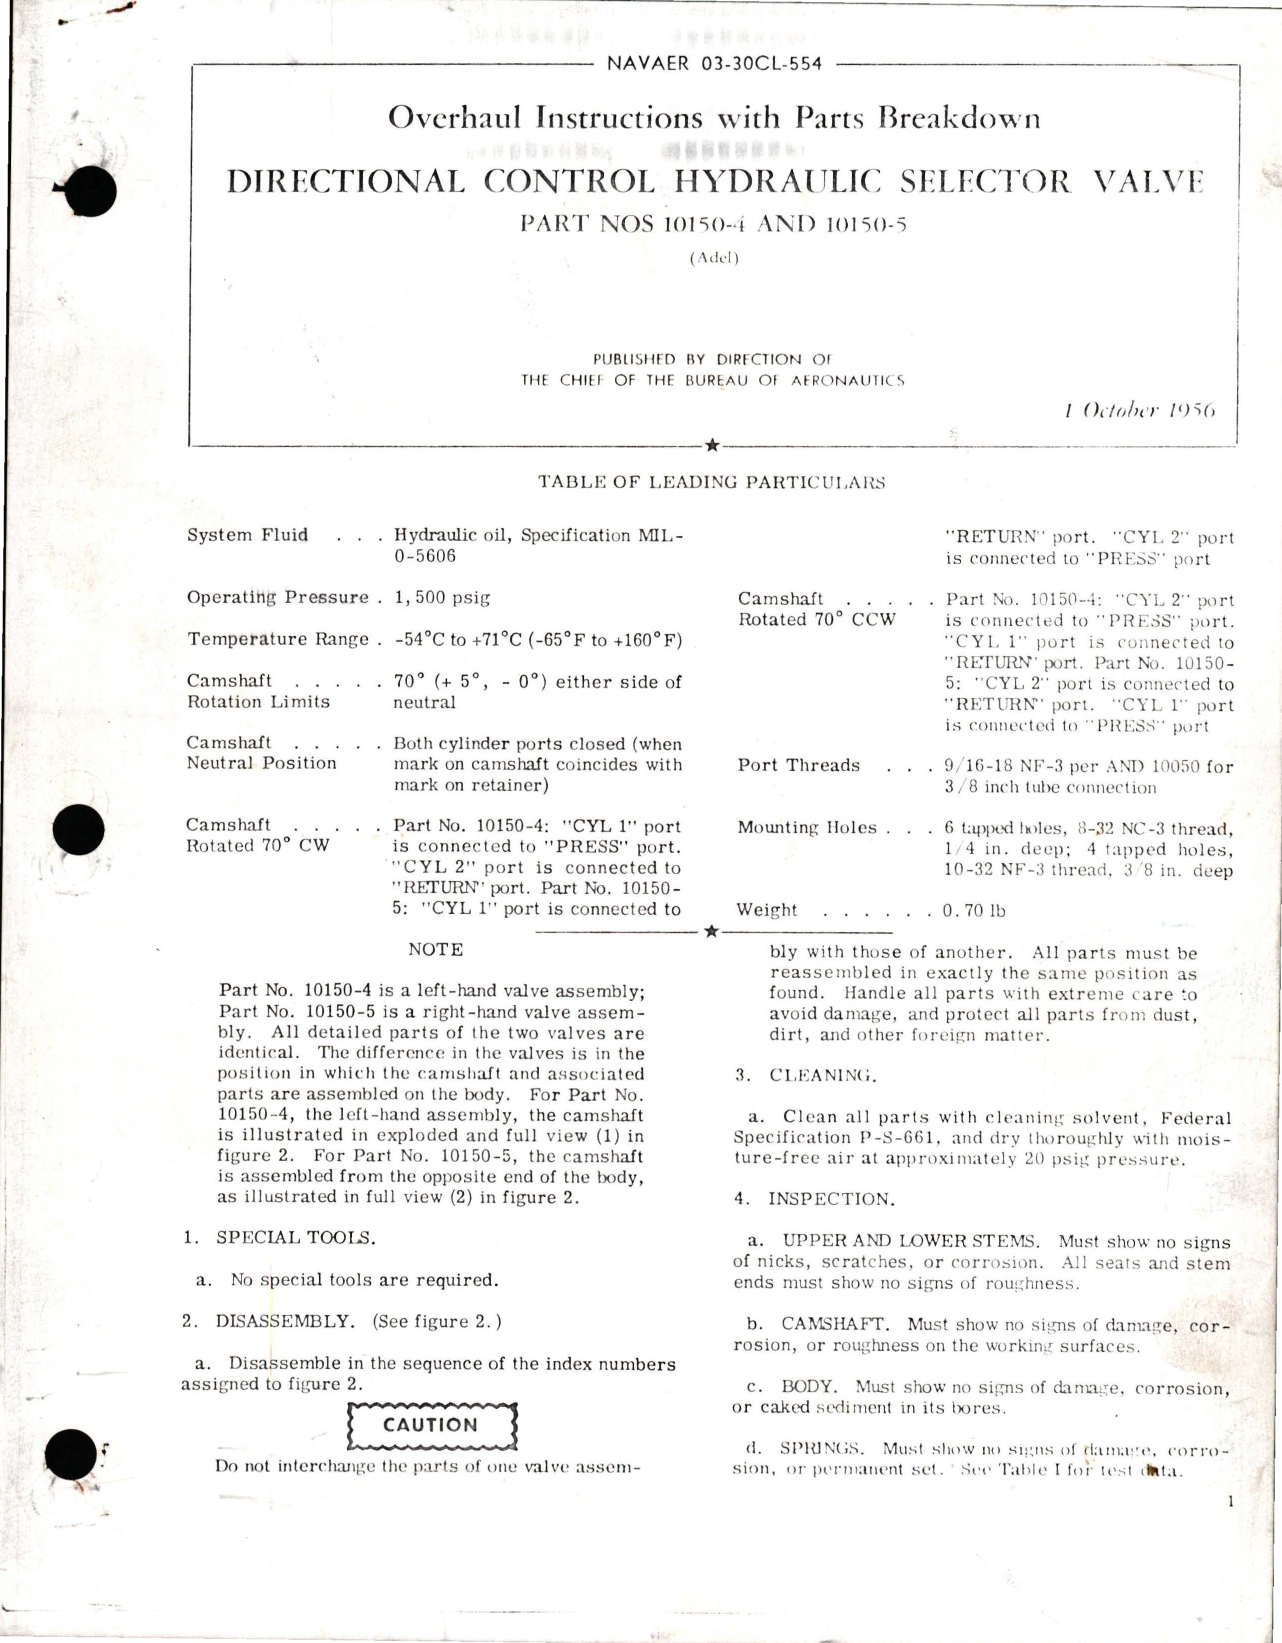 Sample page 1 from AirCorps Library document: Overhaul Instructions with Parts Breakdown for Directional Control Hydraulic Selector Valve - Part 10150-4 and 10150-5 